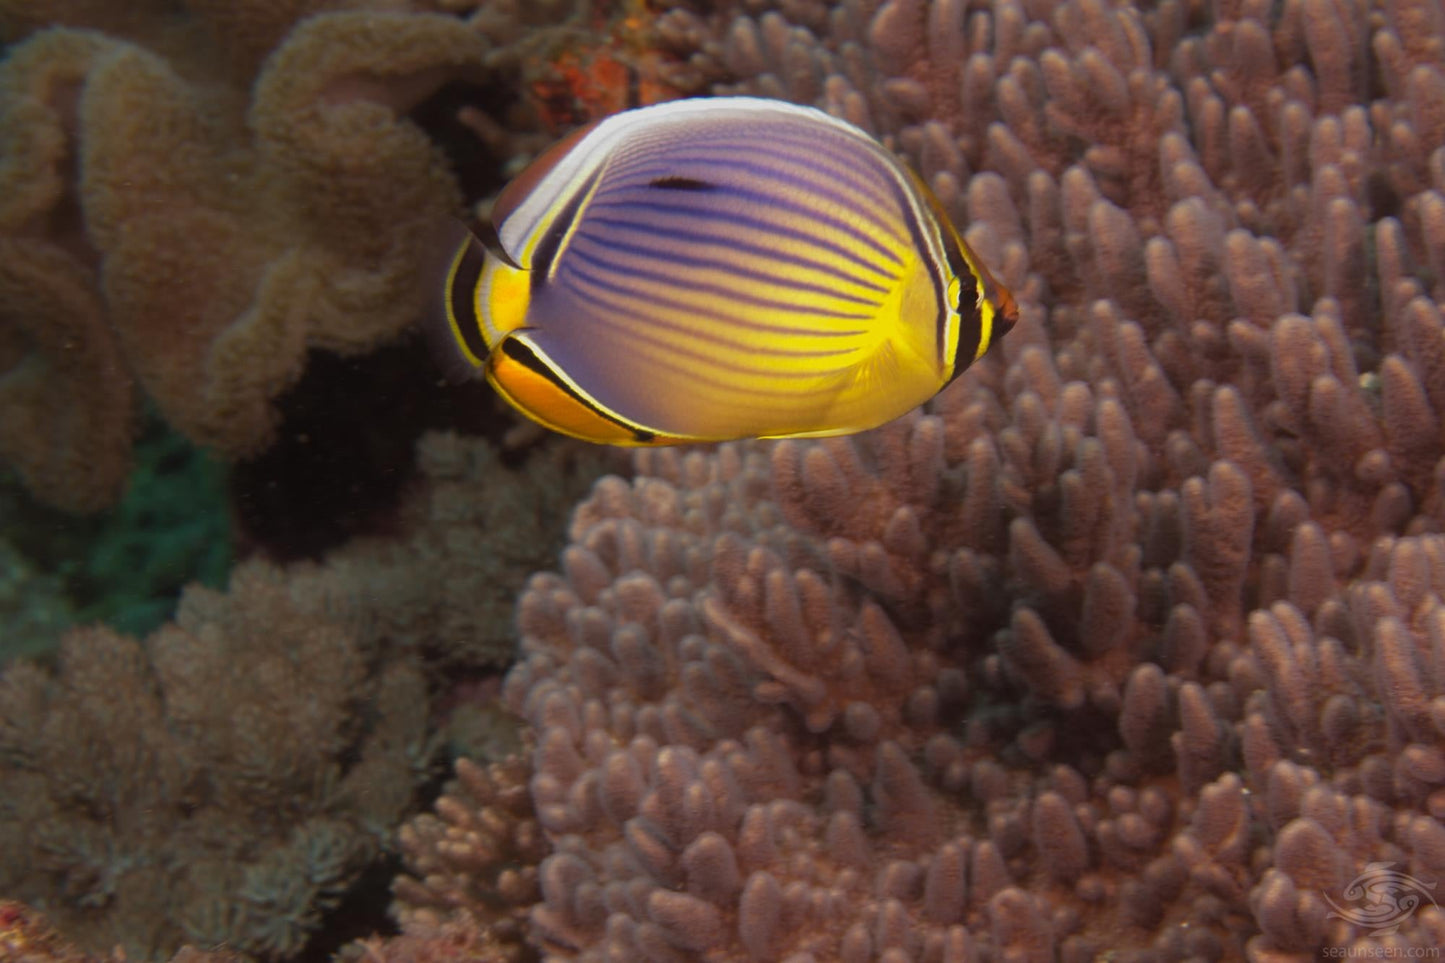 Melon Butterflyfish Size: Tiny 2" or Below